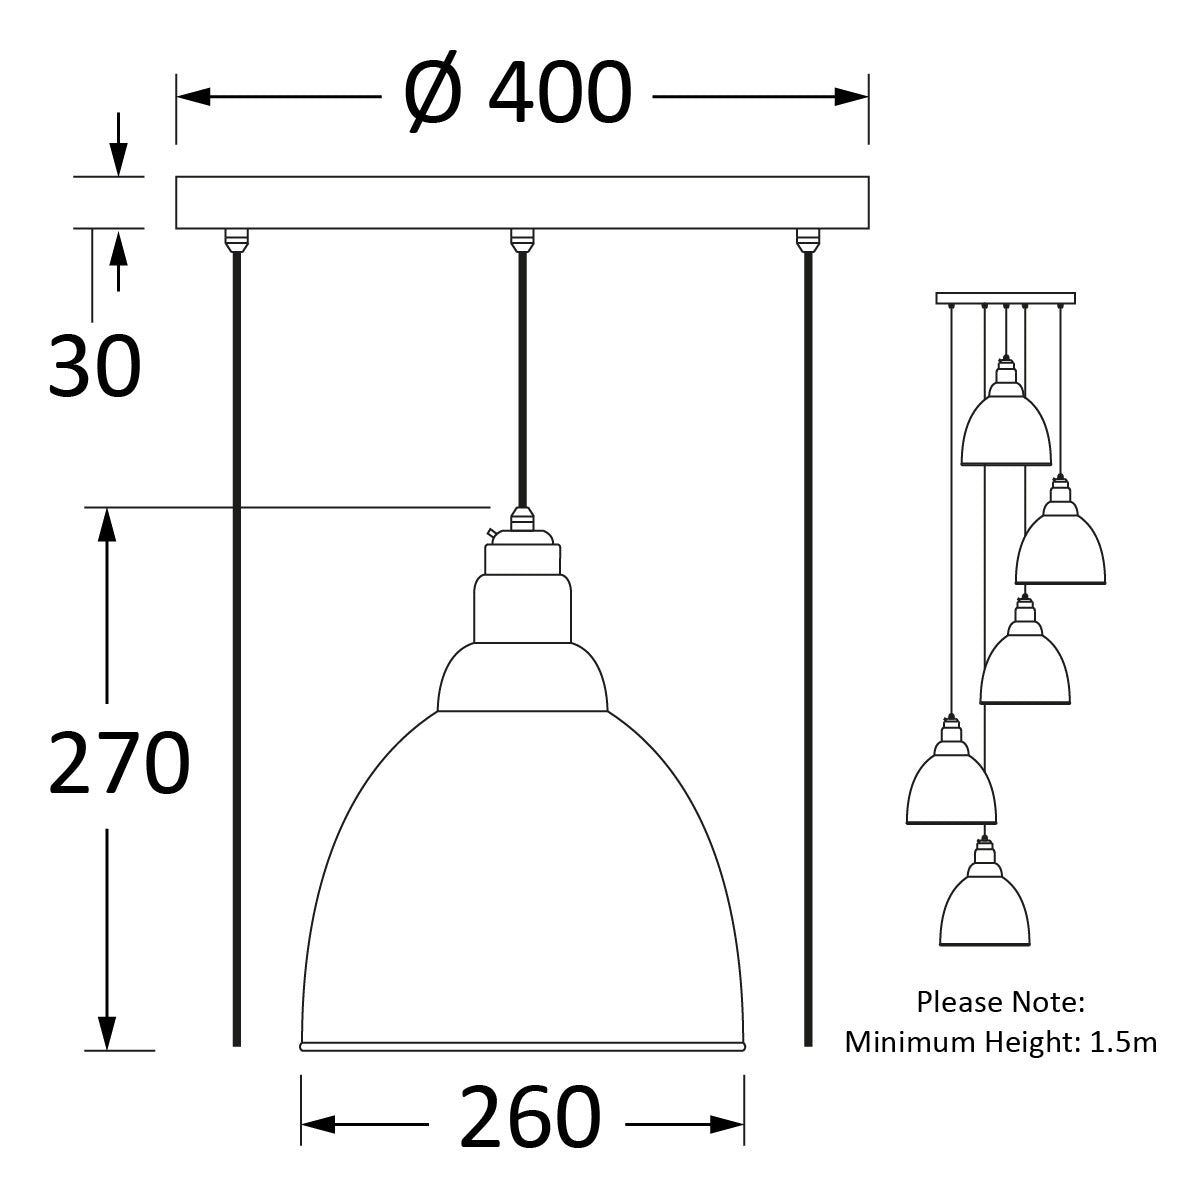 SHOW Technical Drawing of Brindley Cluster Light in Upstream